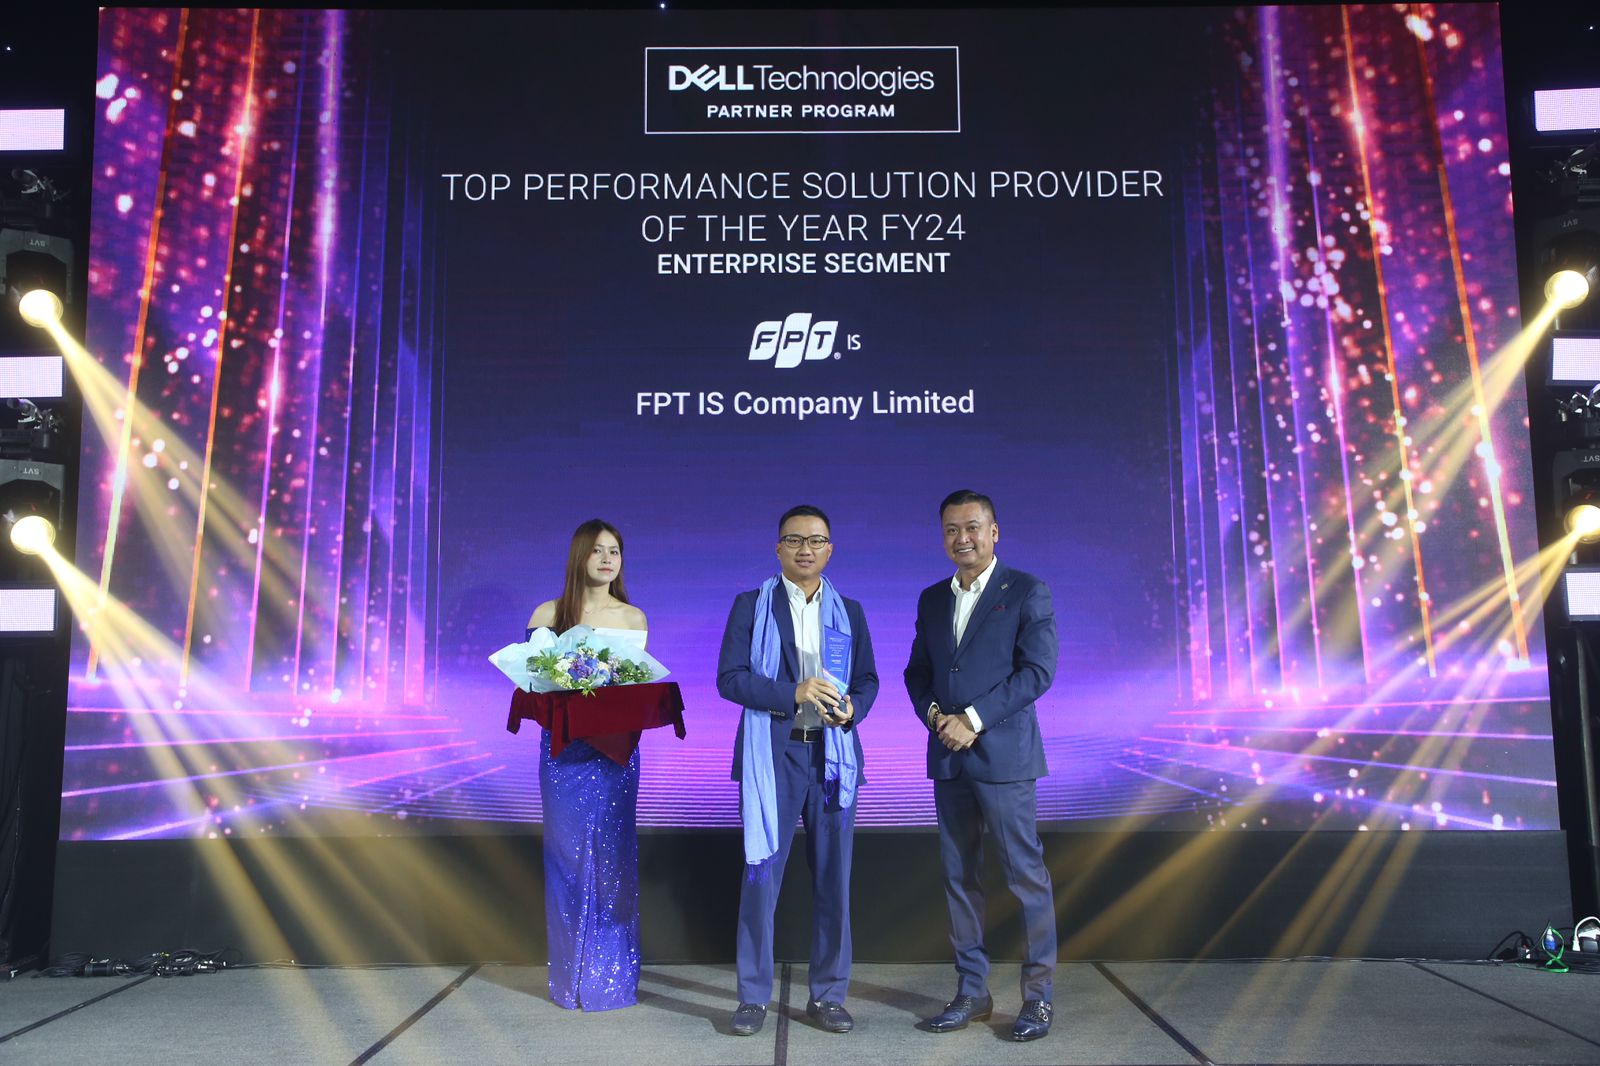 FPT IS đạt giải thưởng “Top Performance Solution Provider of the Year FY24” của Dell Technologies